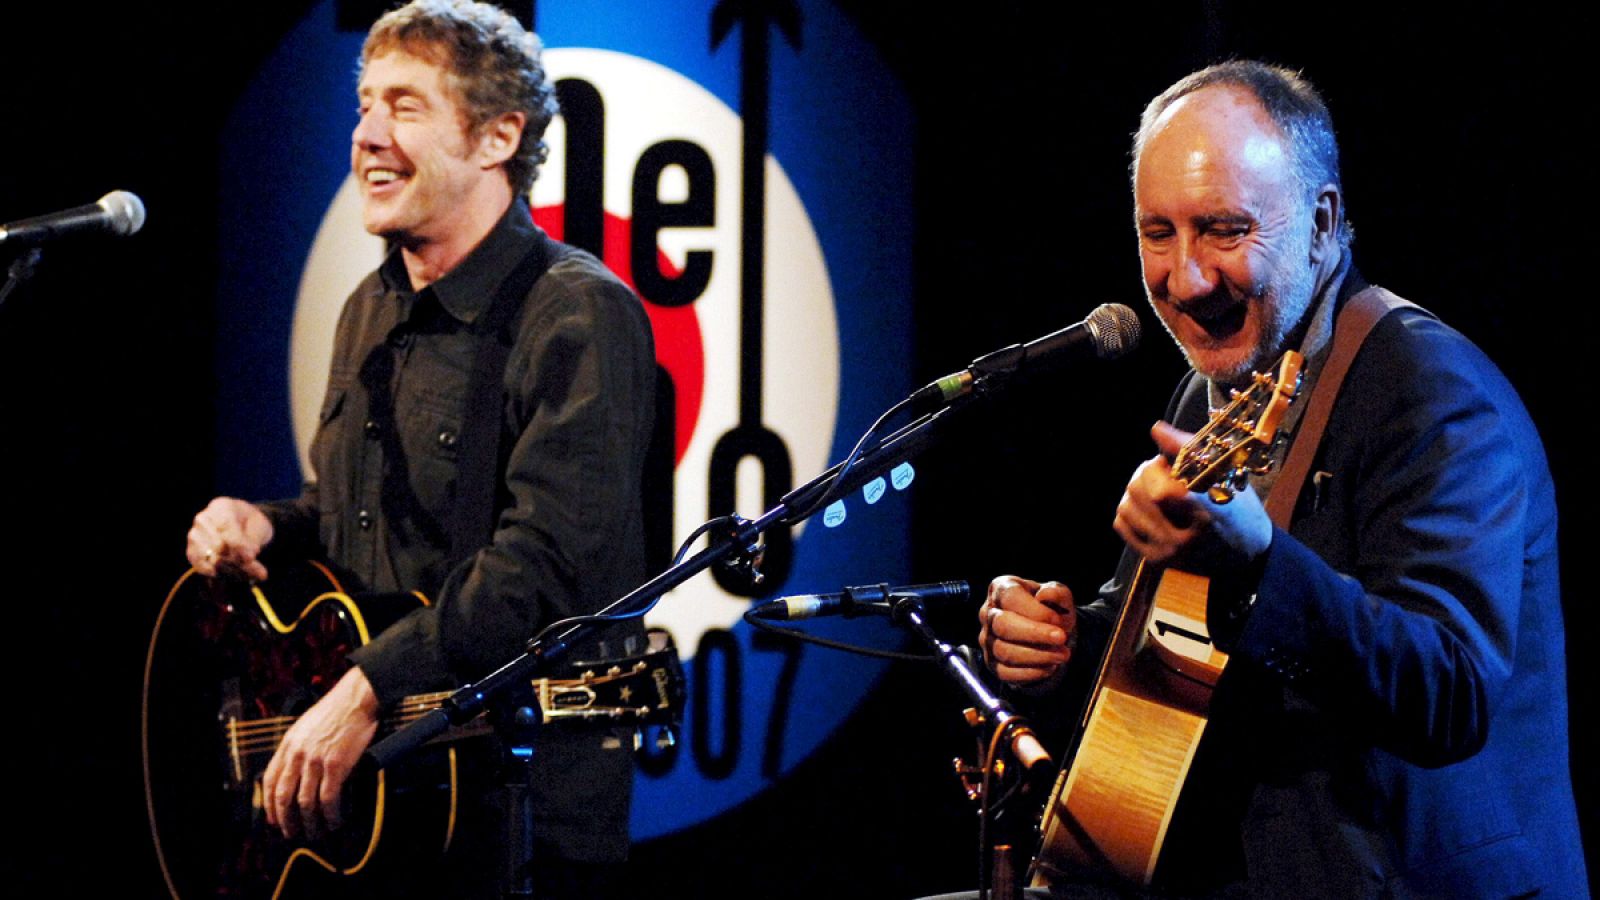 ROGER DOULTRYAND Y PETE TOWNSEND THE WHO